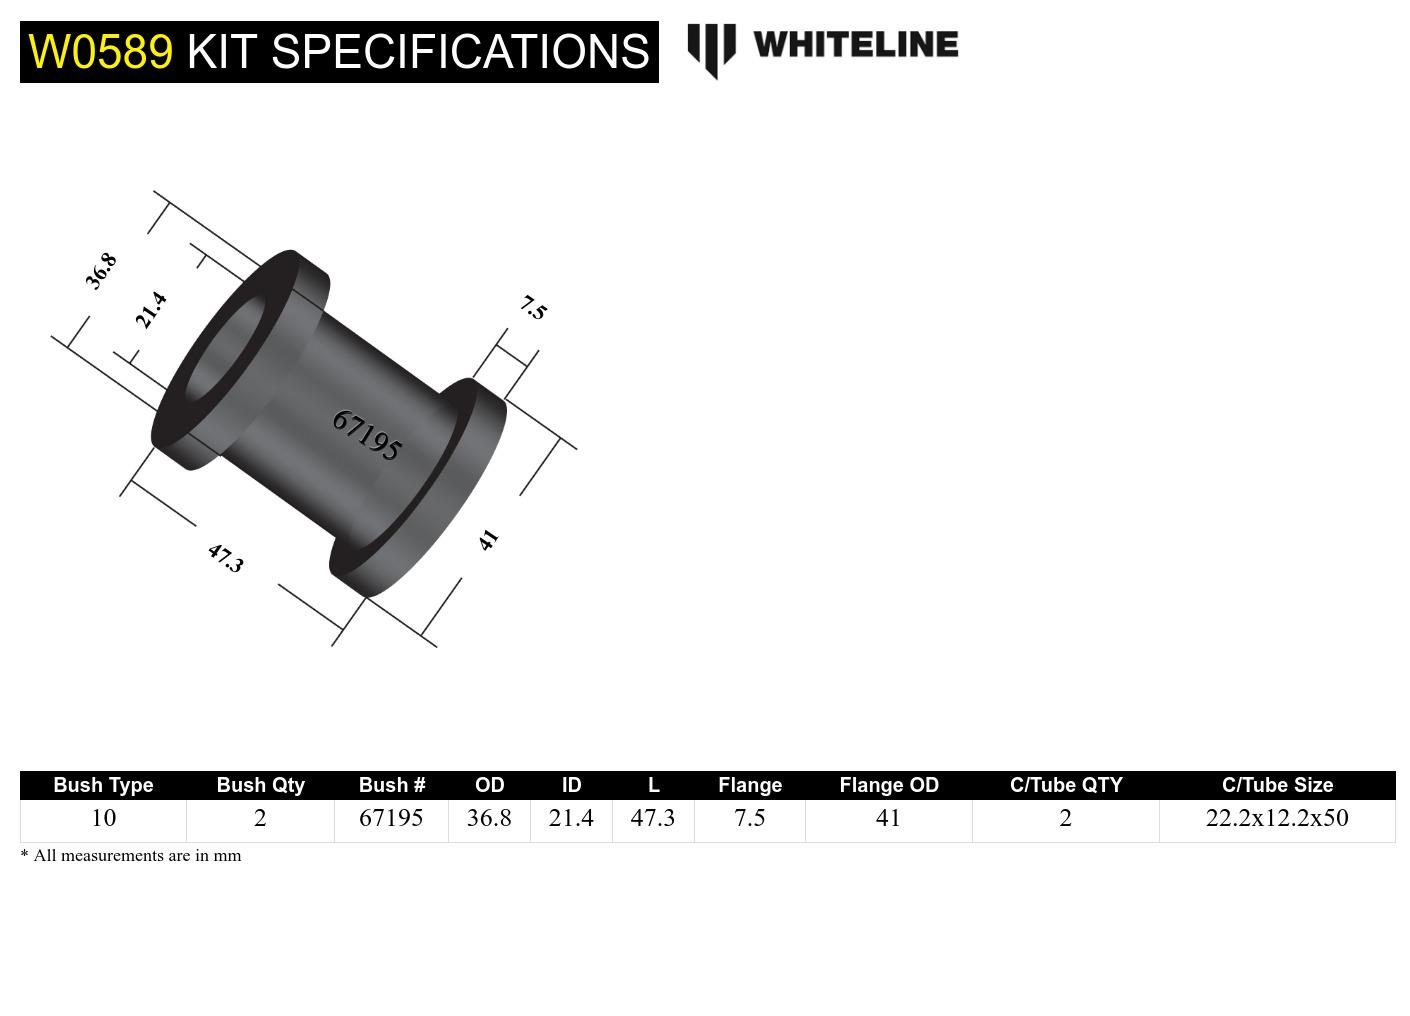 Rear Shock absorber - to control arm bushing